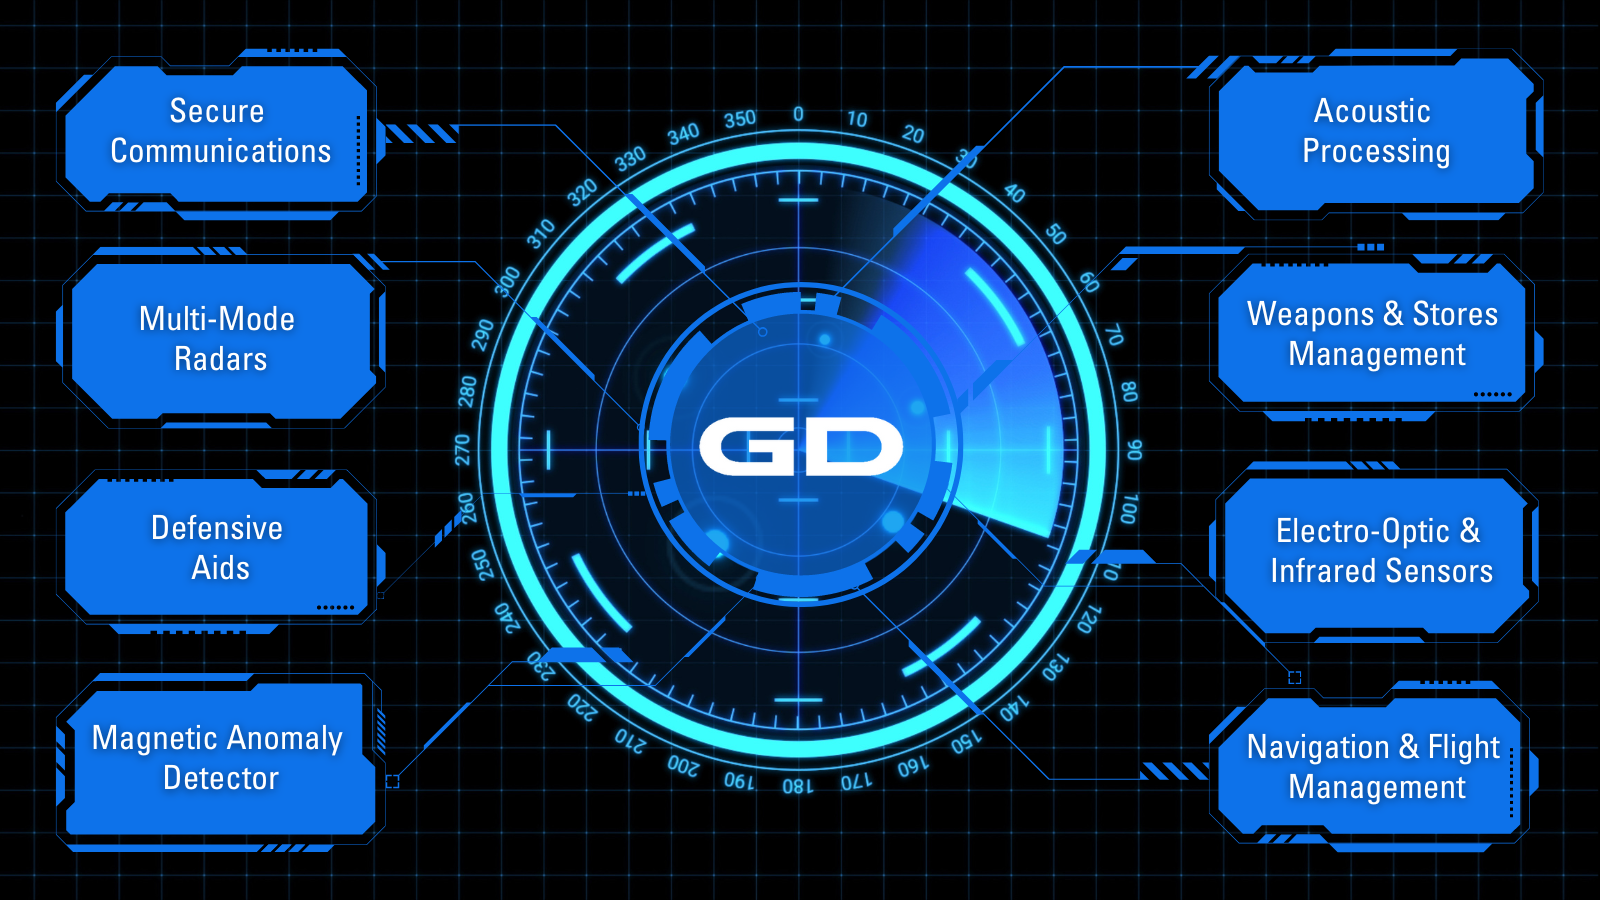 GD logo connected to various mission system types